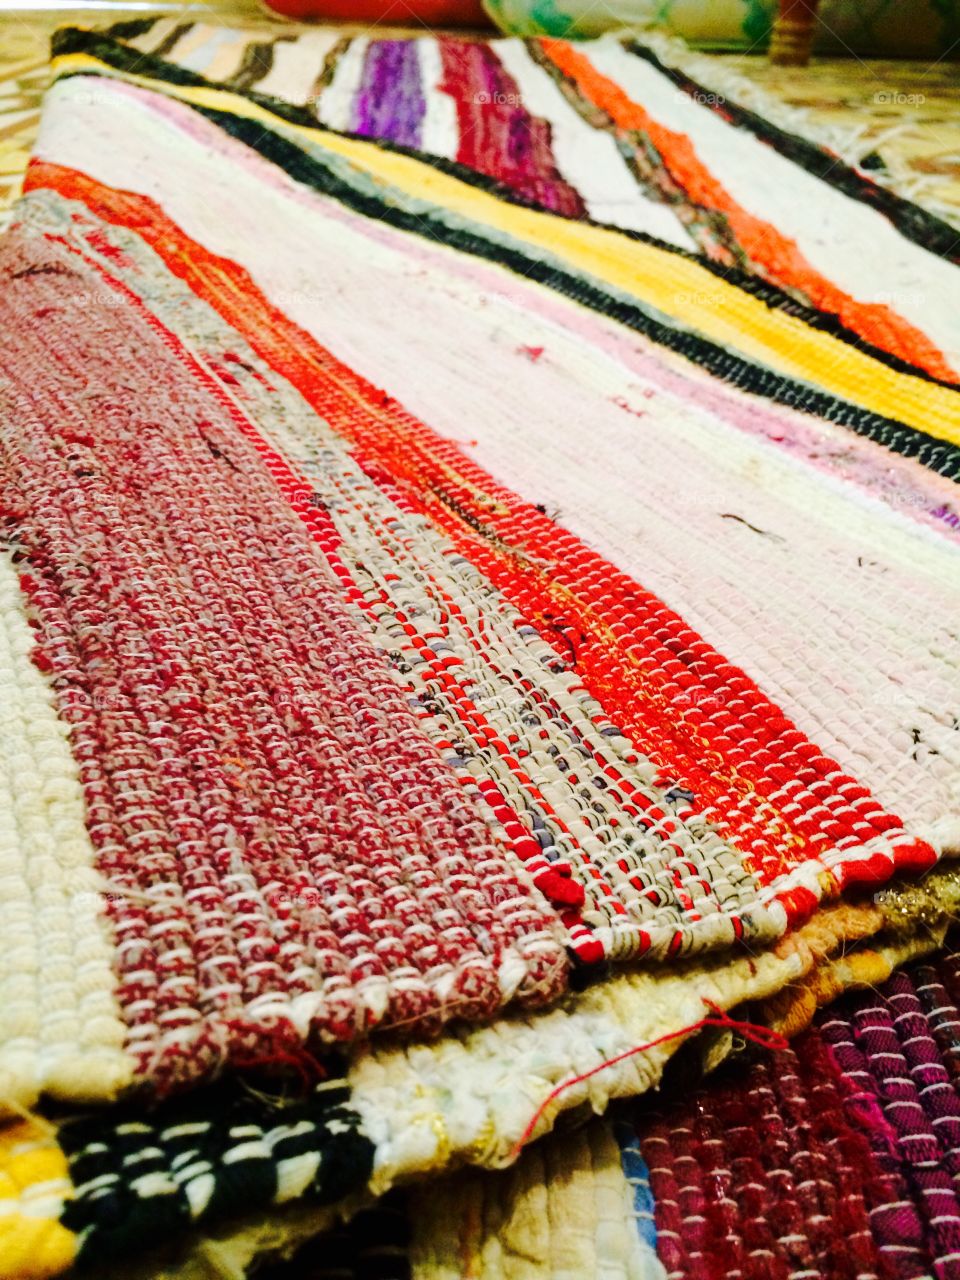 Old blanket with colors beautiful #clash of #colour